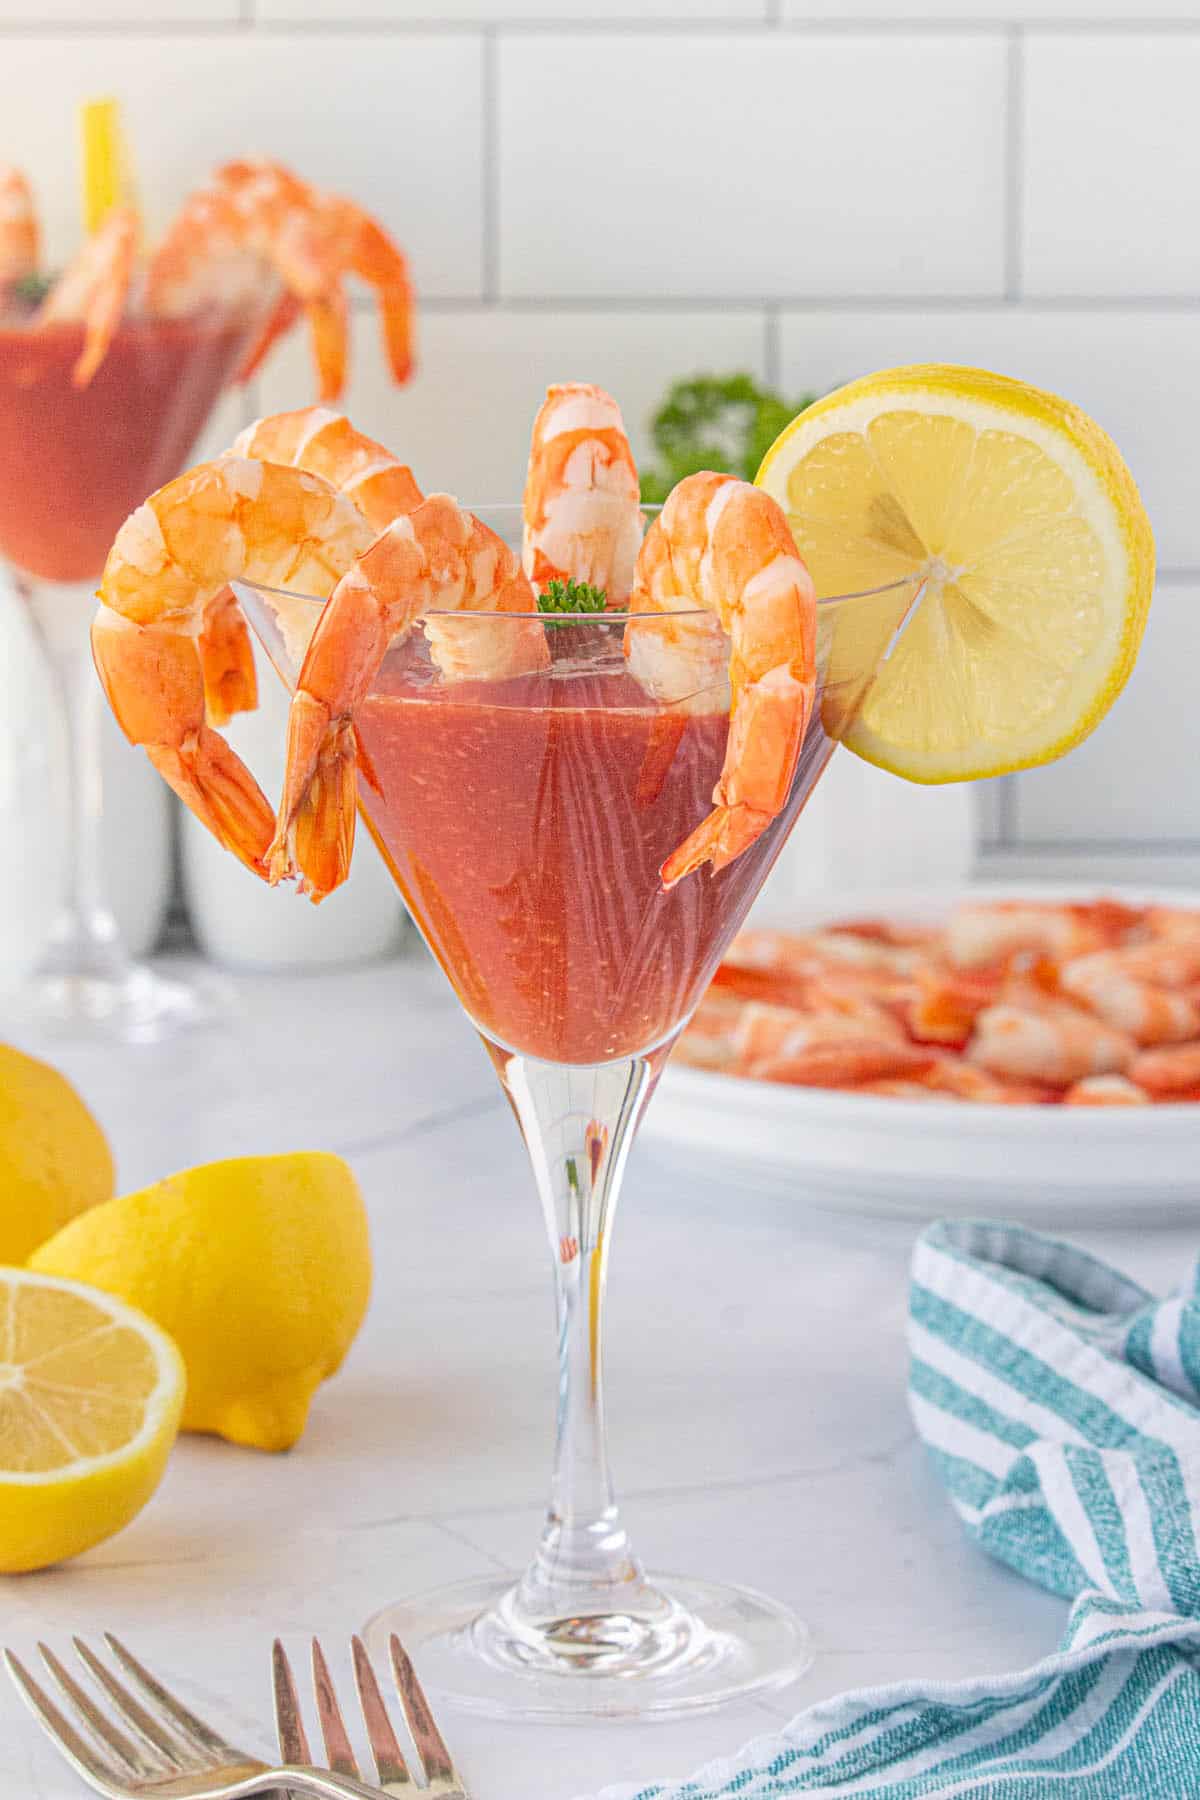 A pretty glass filled with shrimp cocktail sauce. With pretty plump shrimp hanging over the edges of the glass. Lemon is used for garnish on the glass.